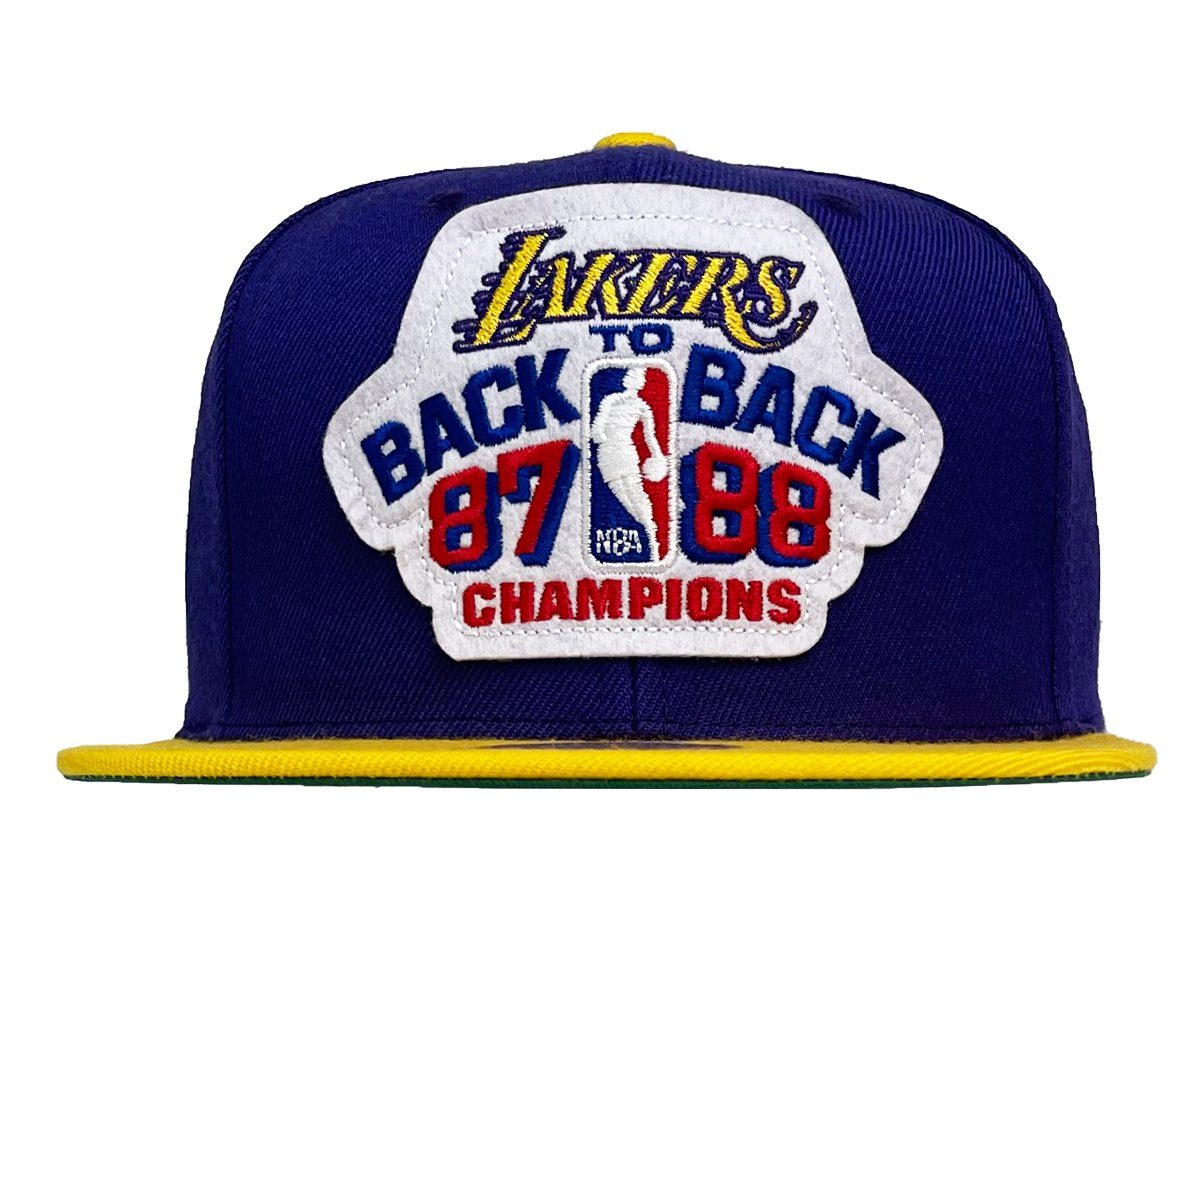 Angeles Lakers Cap & 87/88 Back Mitchell Champs Los To Back Snapback Ness NBA